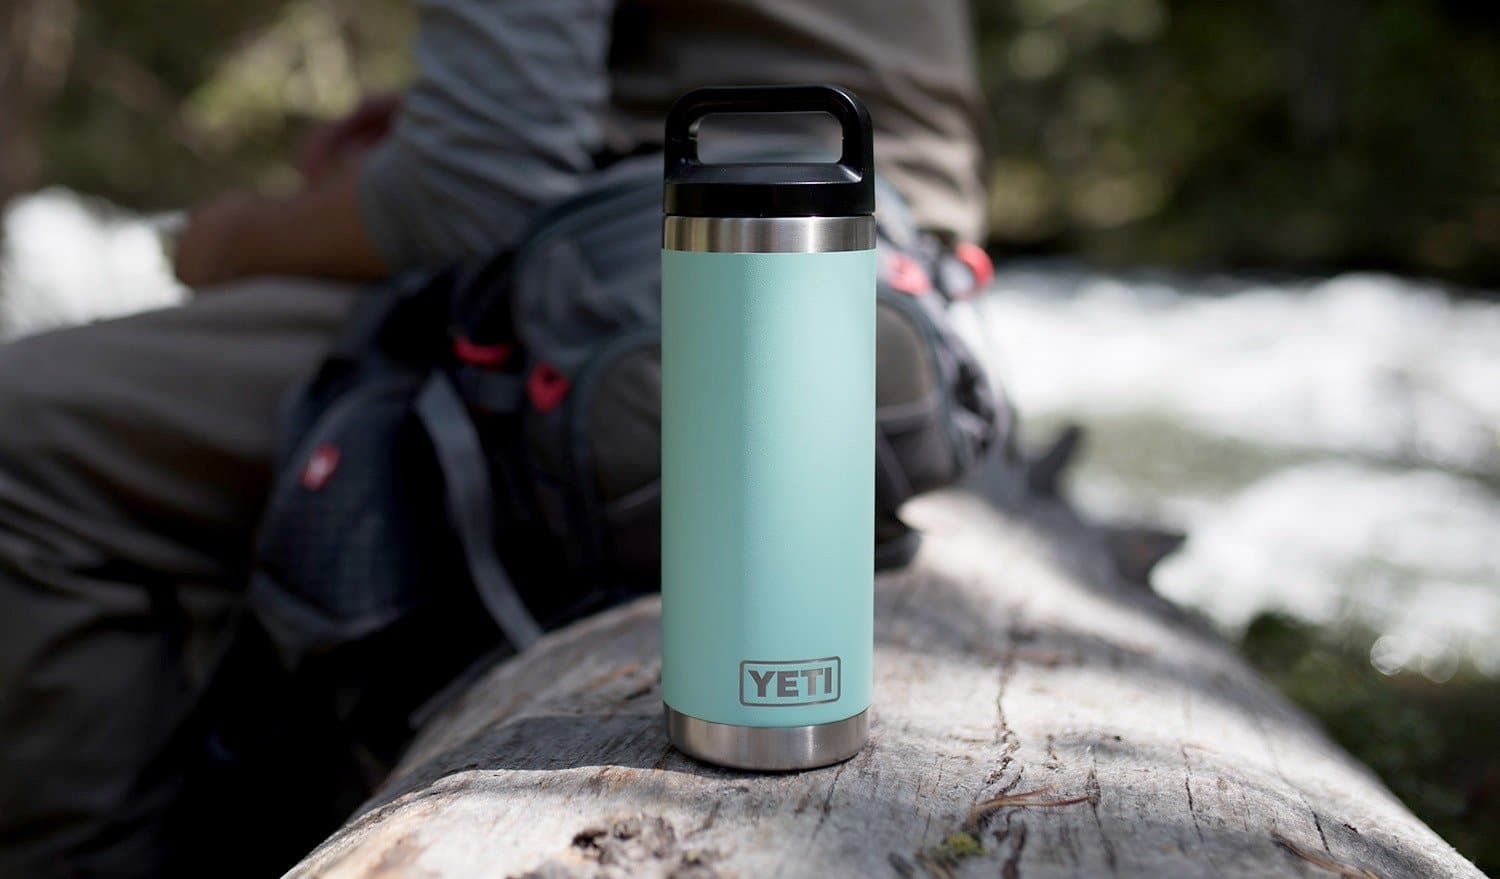 Hydro Flask vs Yeti: Which Brand Is Better? 